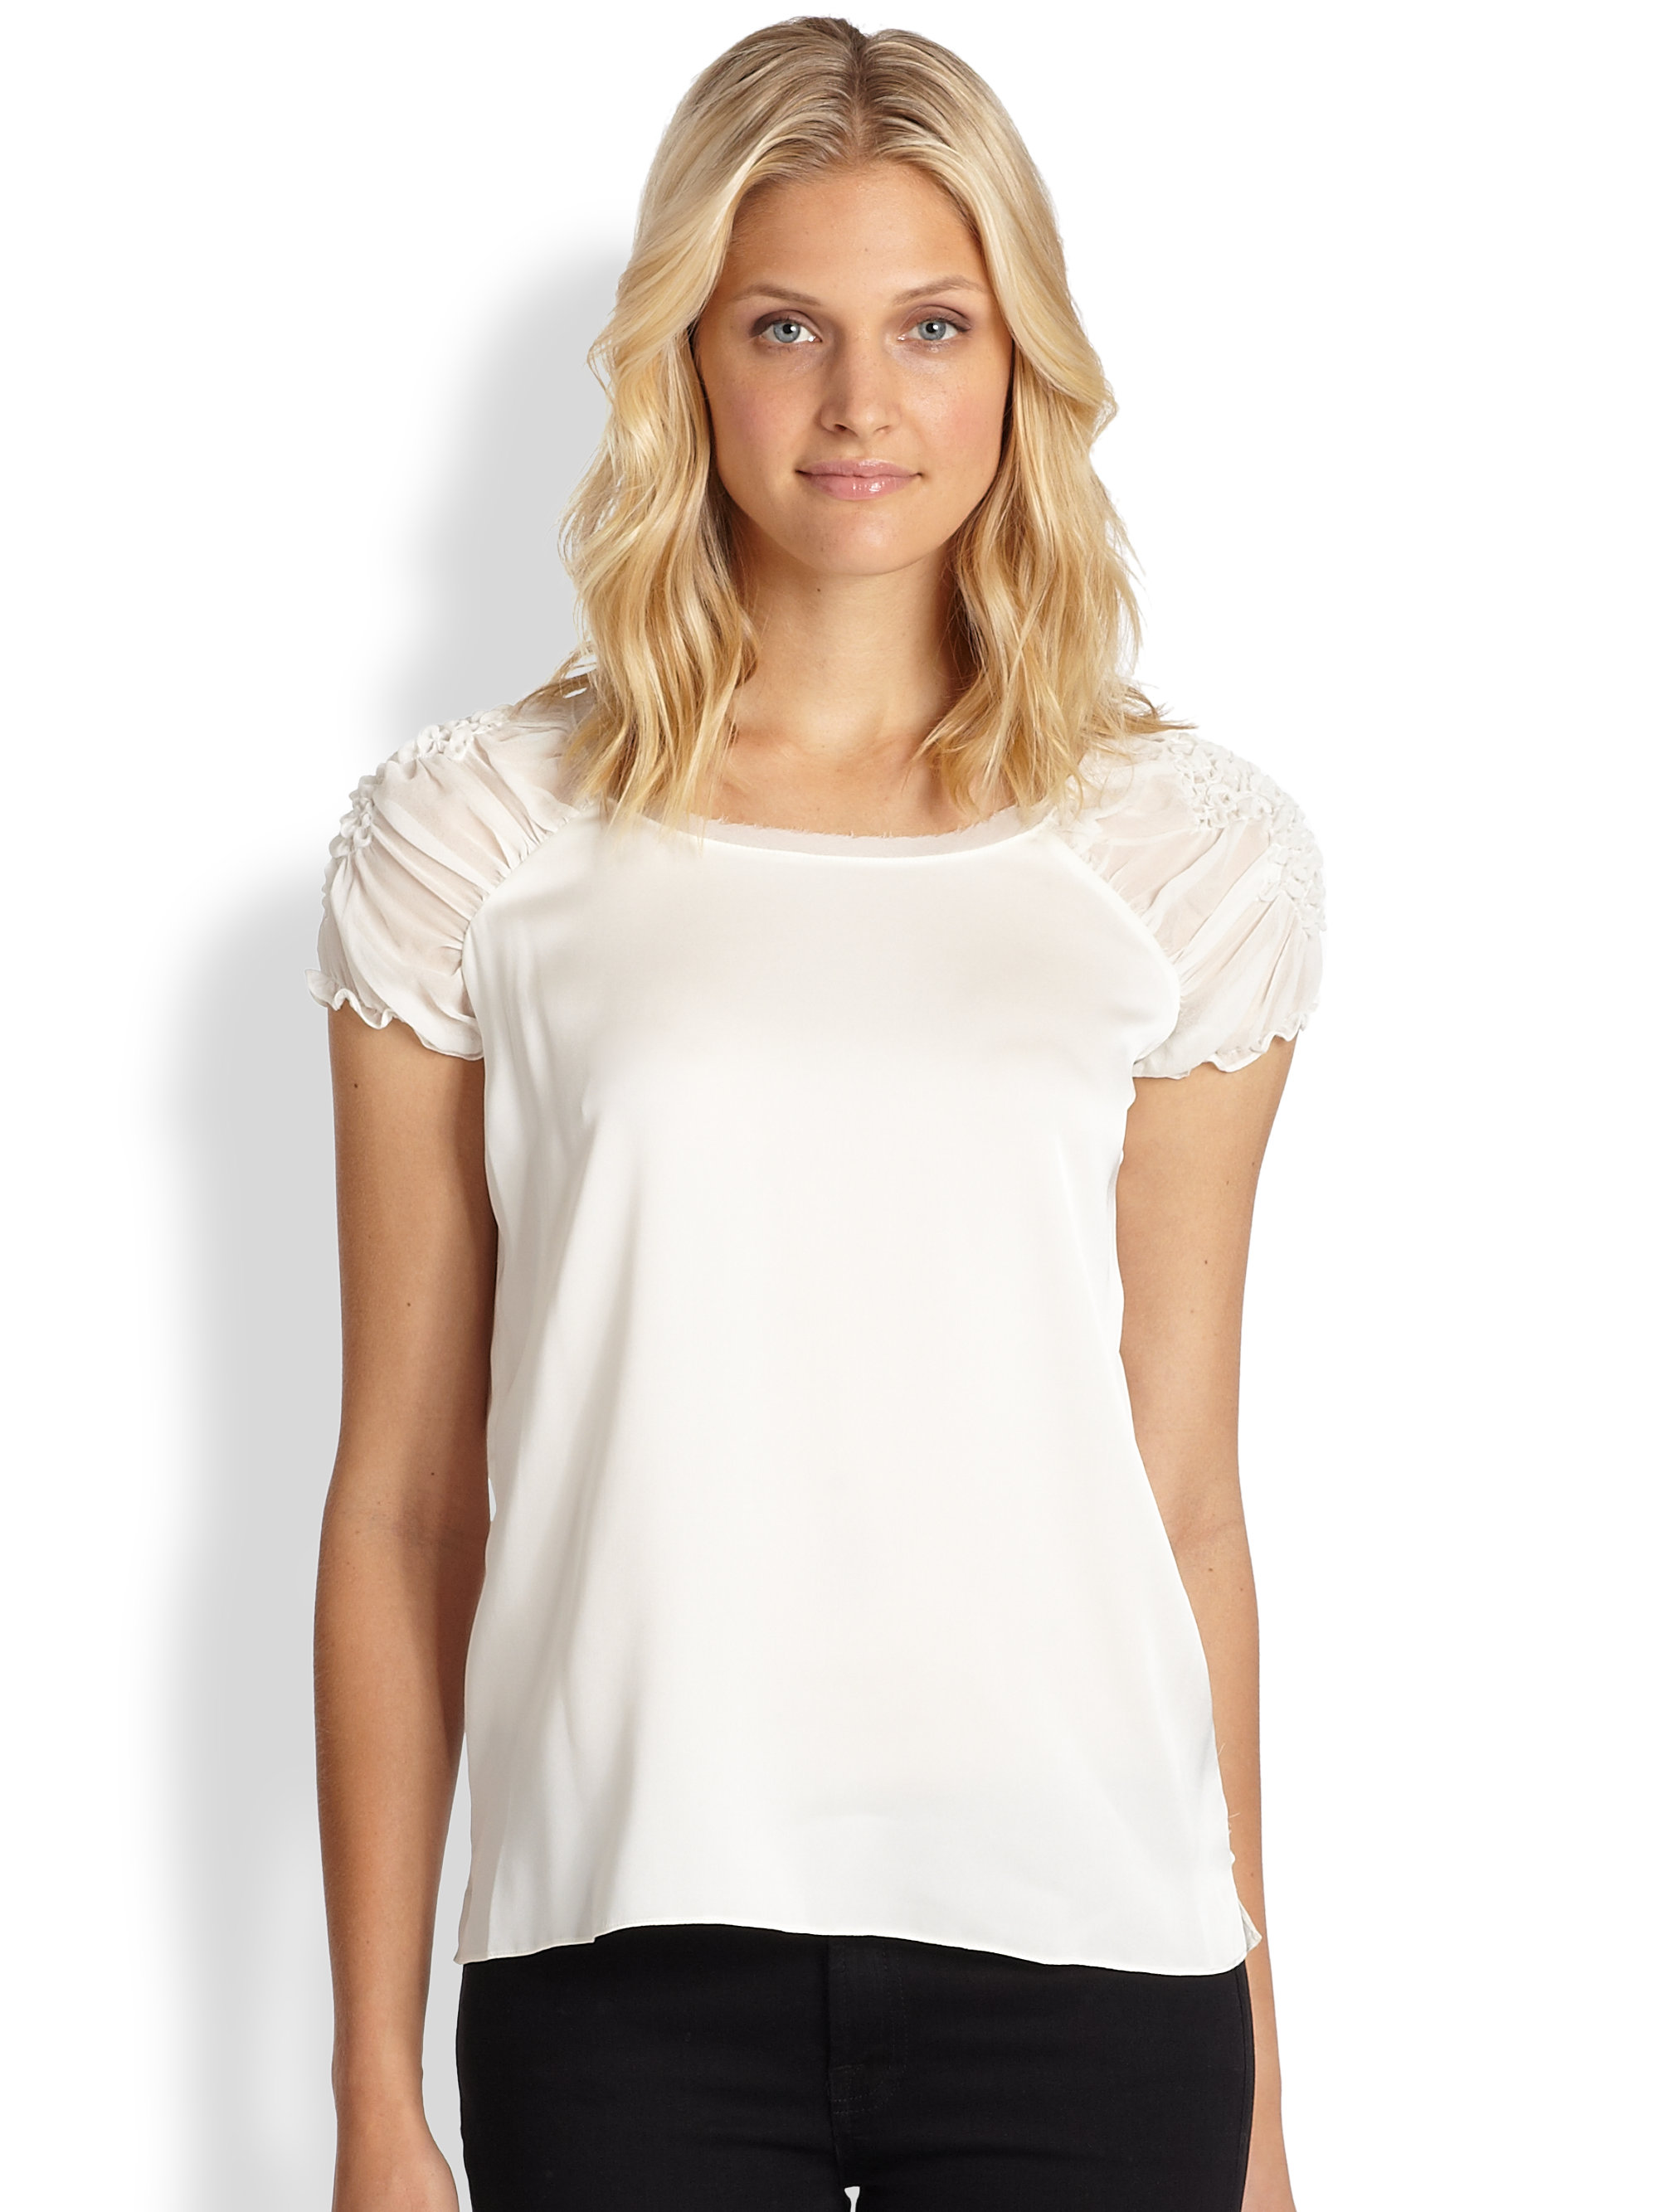 Lyst - Elie tahari Lucy Blouse in White